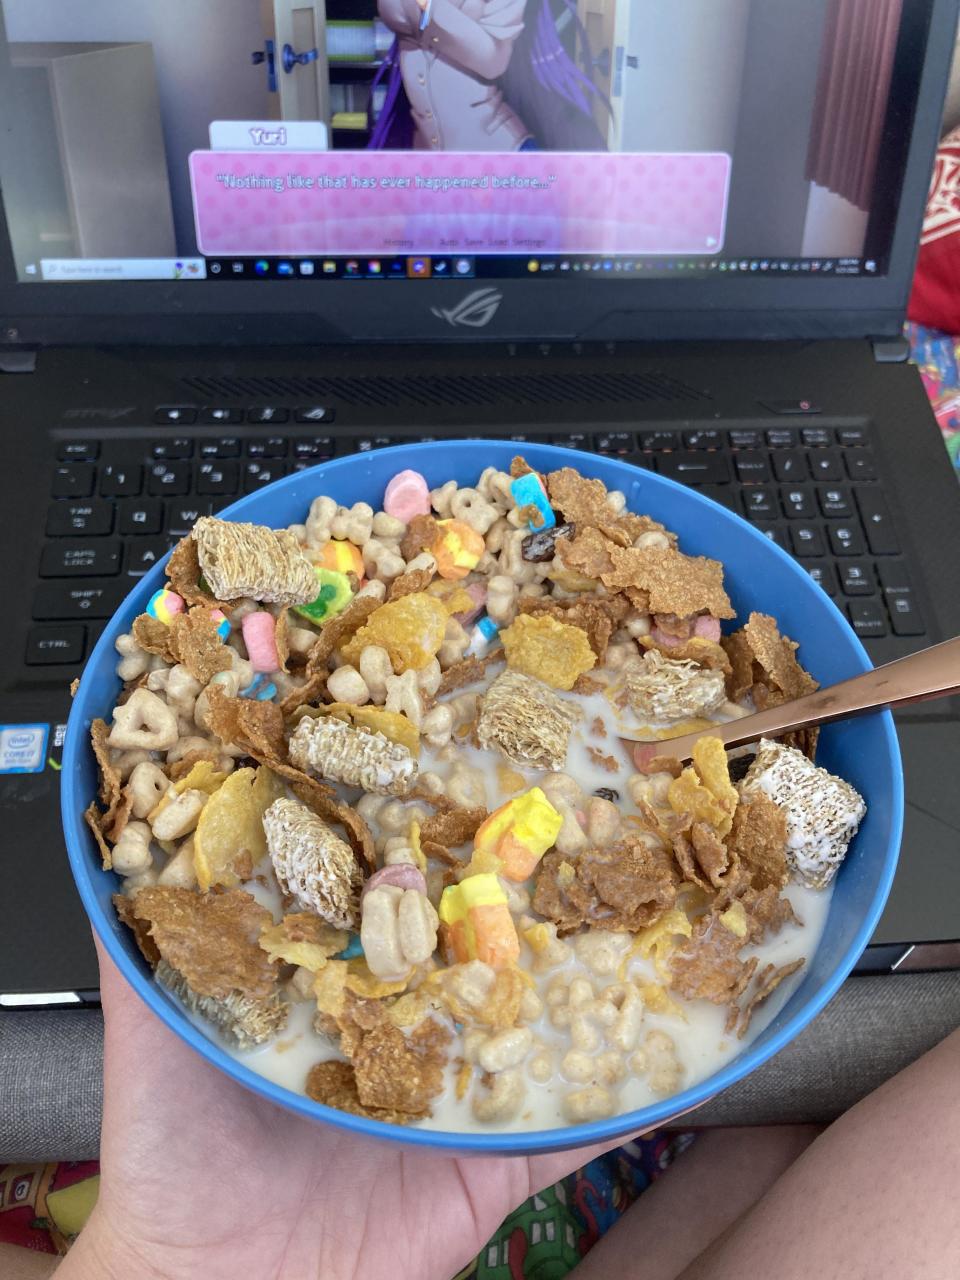 A person holding a bowl of cereal in front of a laptop screen